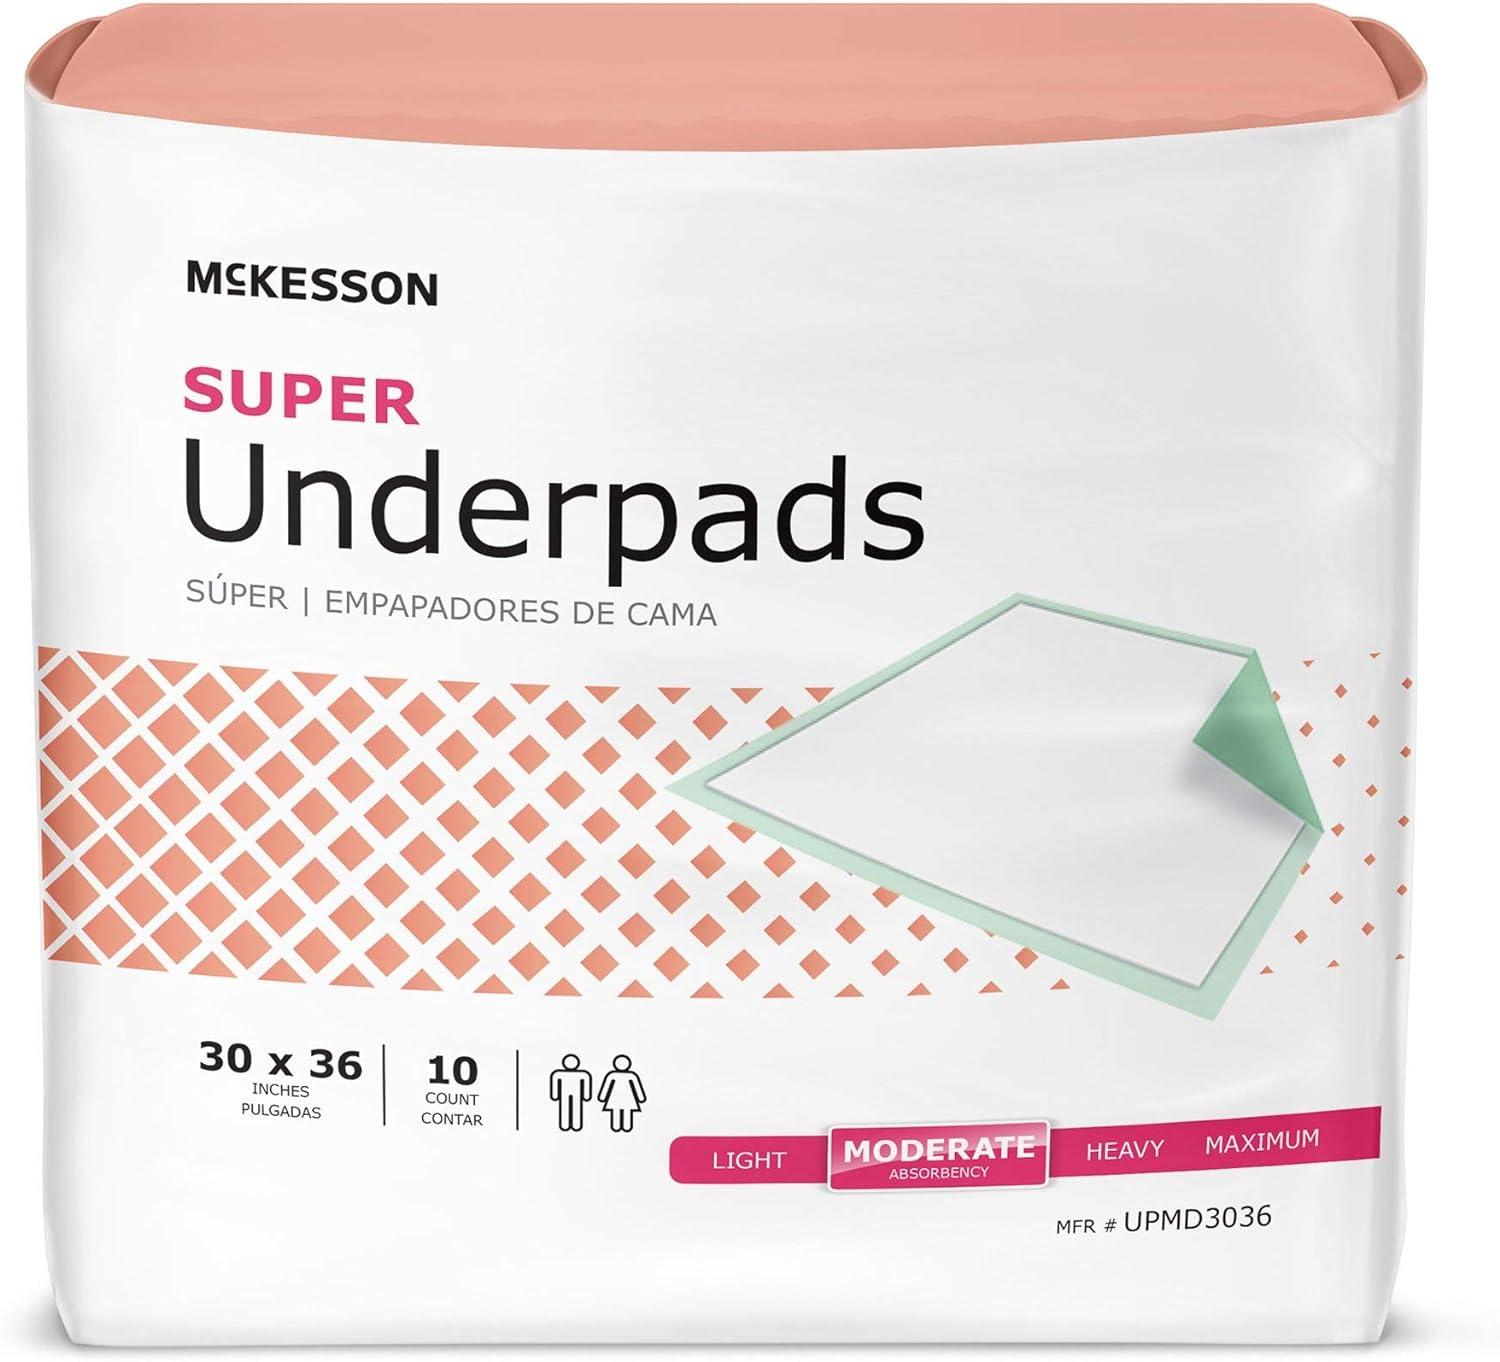 McKesson Upmd3036 - Upad Med Absorb 30X36, 10 Count, Unisex, Incontinence Protector